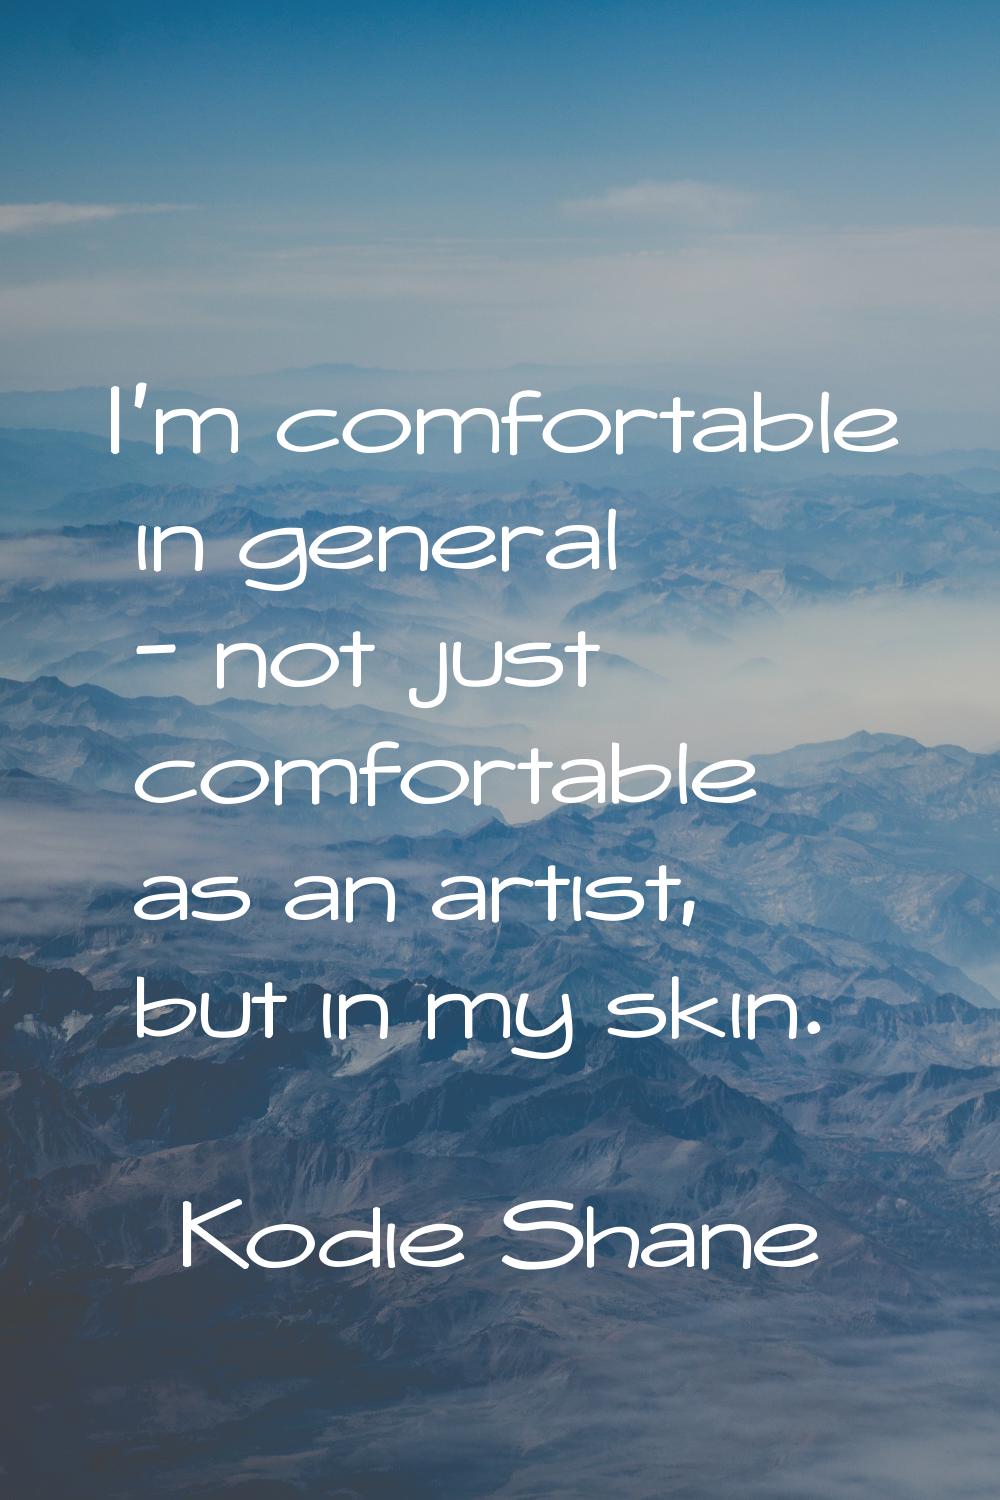 I'm comfortable in general - not just comfortable as an artist, but in my skin.